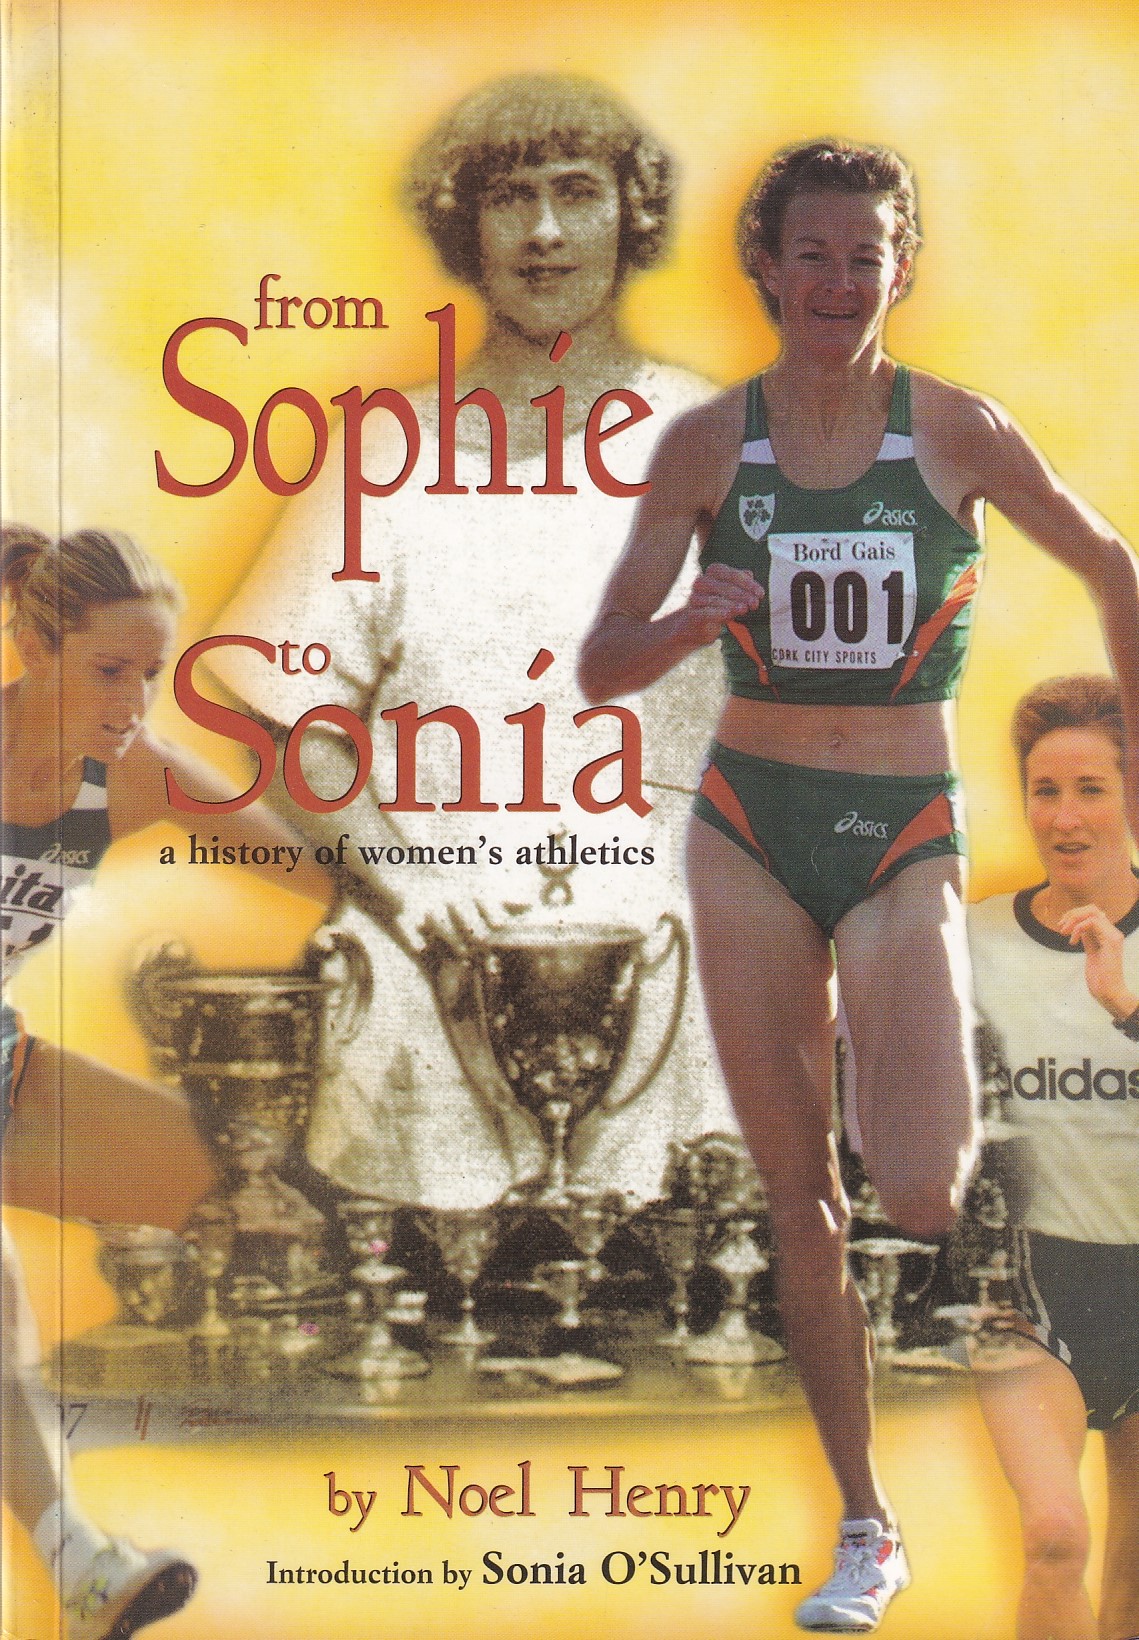 From Sophie to Sonia: A history of women’s athletics [Signed] by Noel Henry